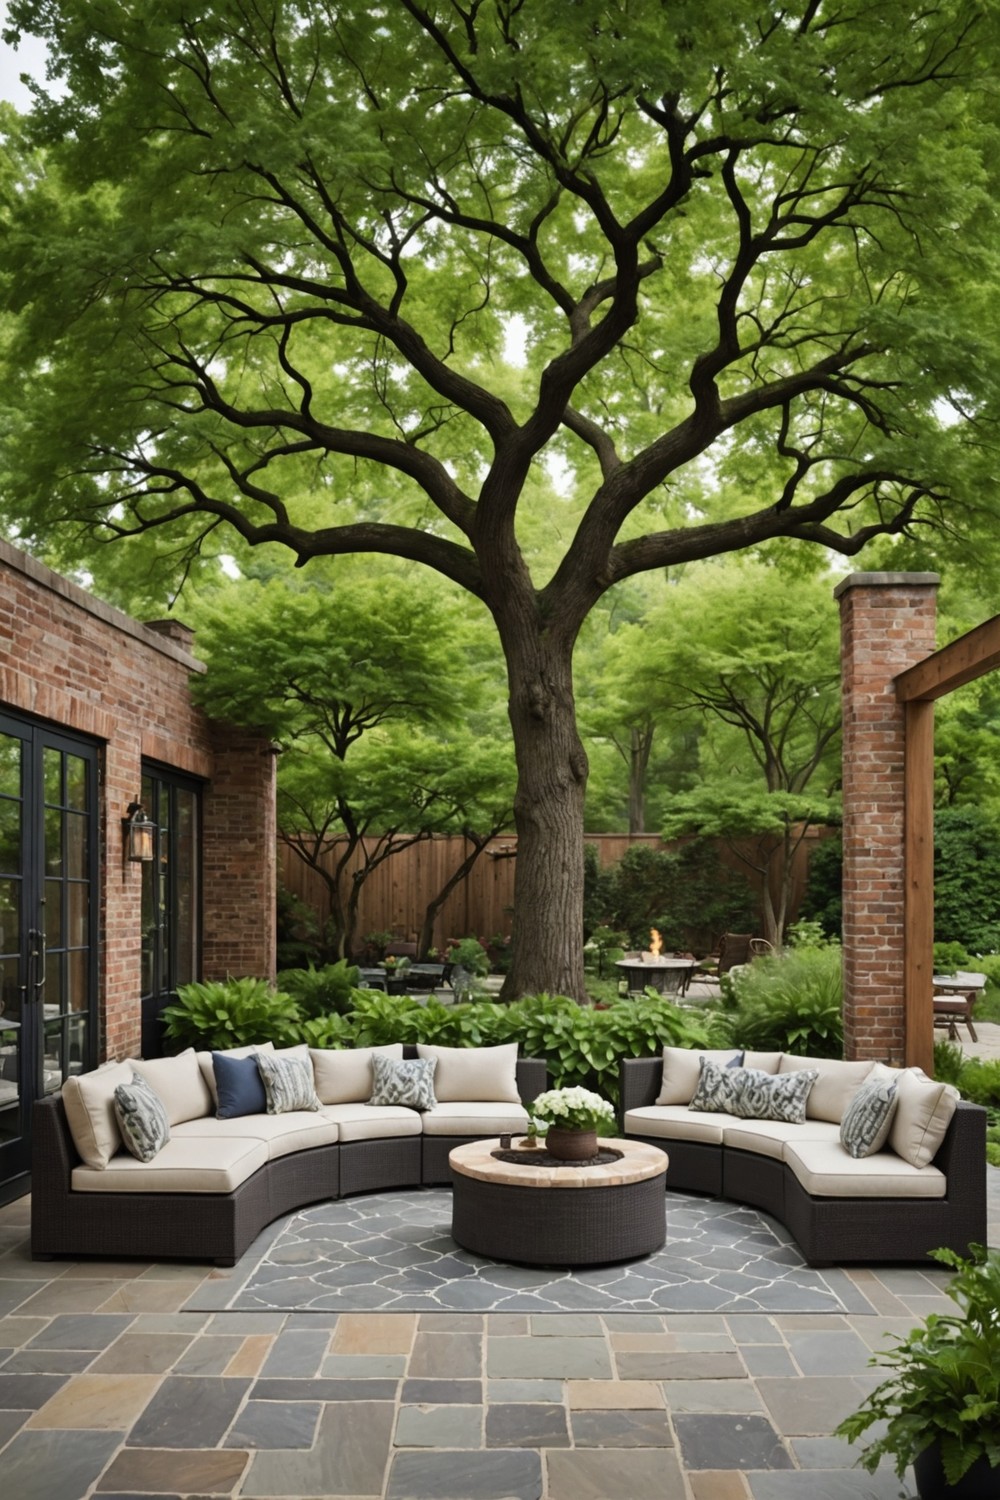 Build a Natural Stone or Brick Patio Around the Tree